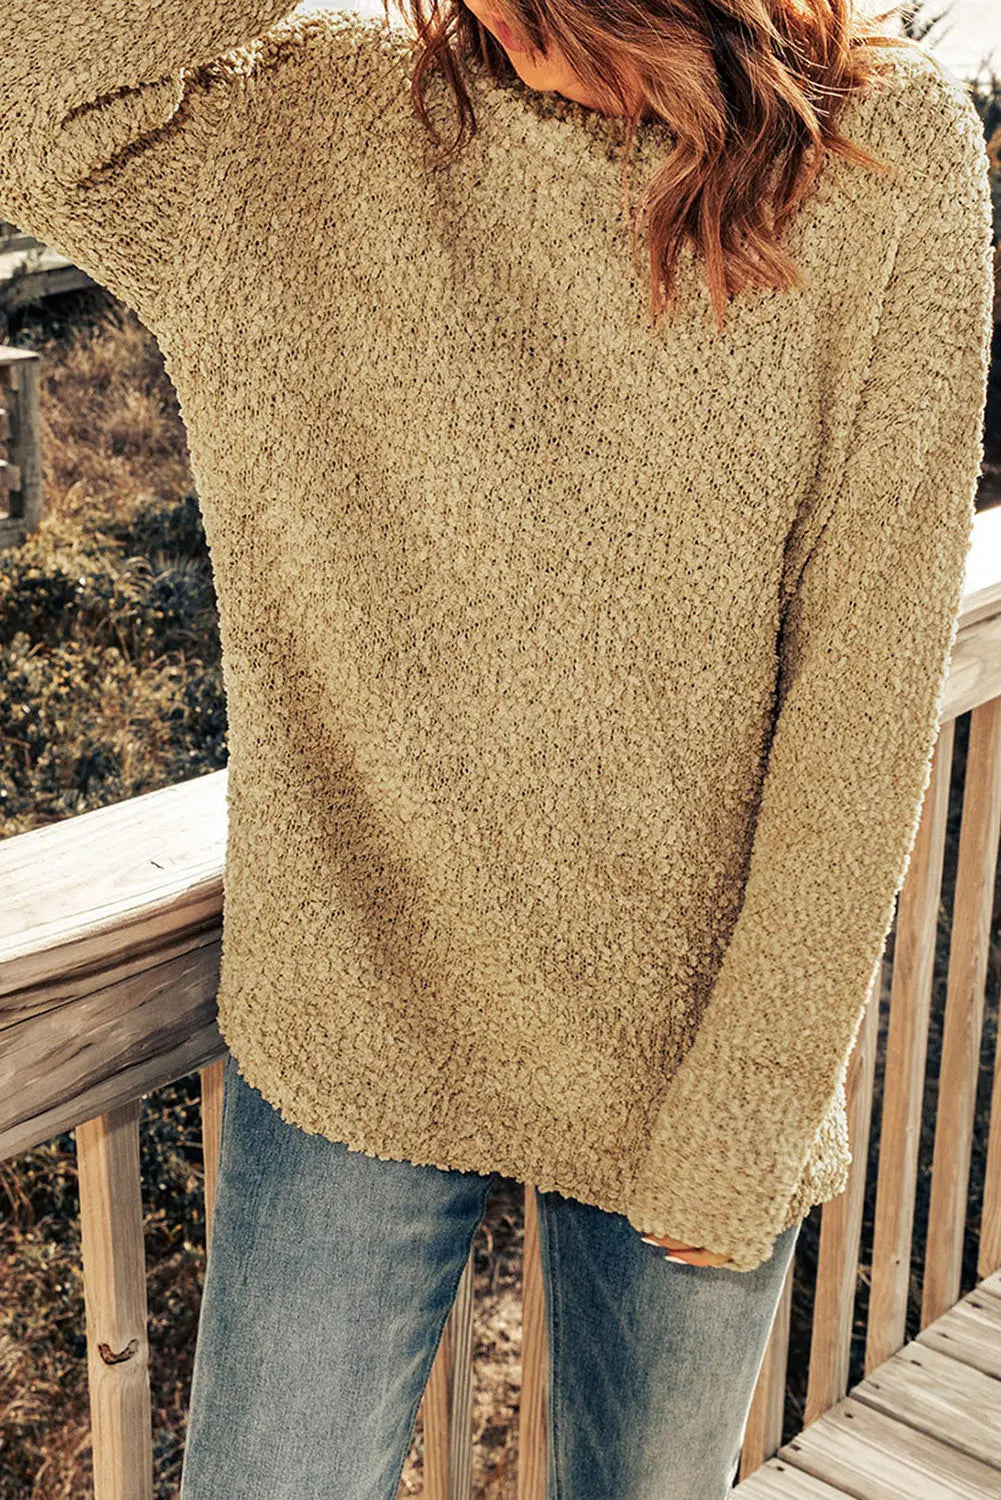 Apricot porncorn drop shoulder pullover knit sweater - tops